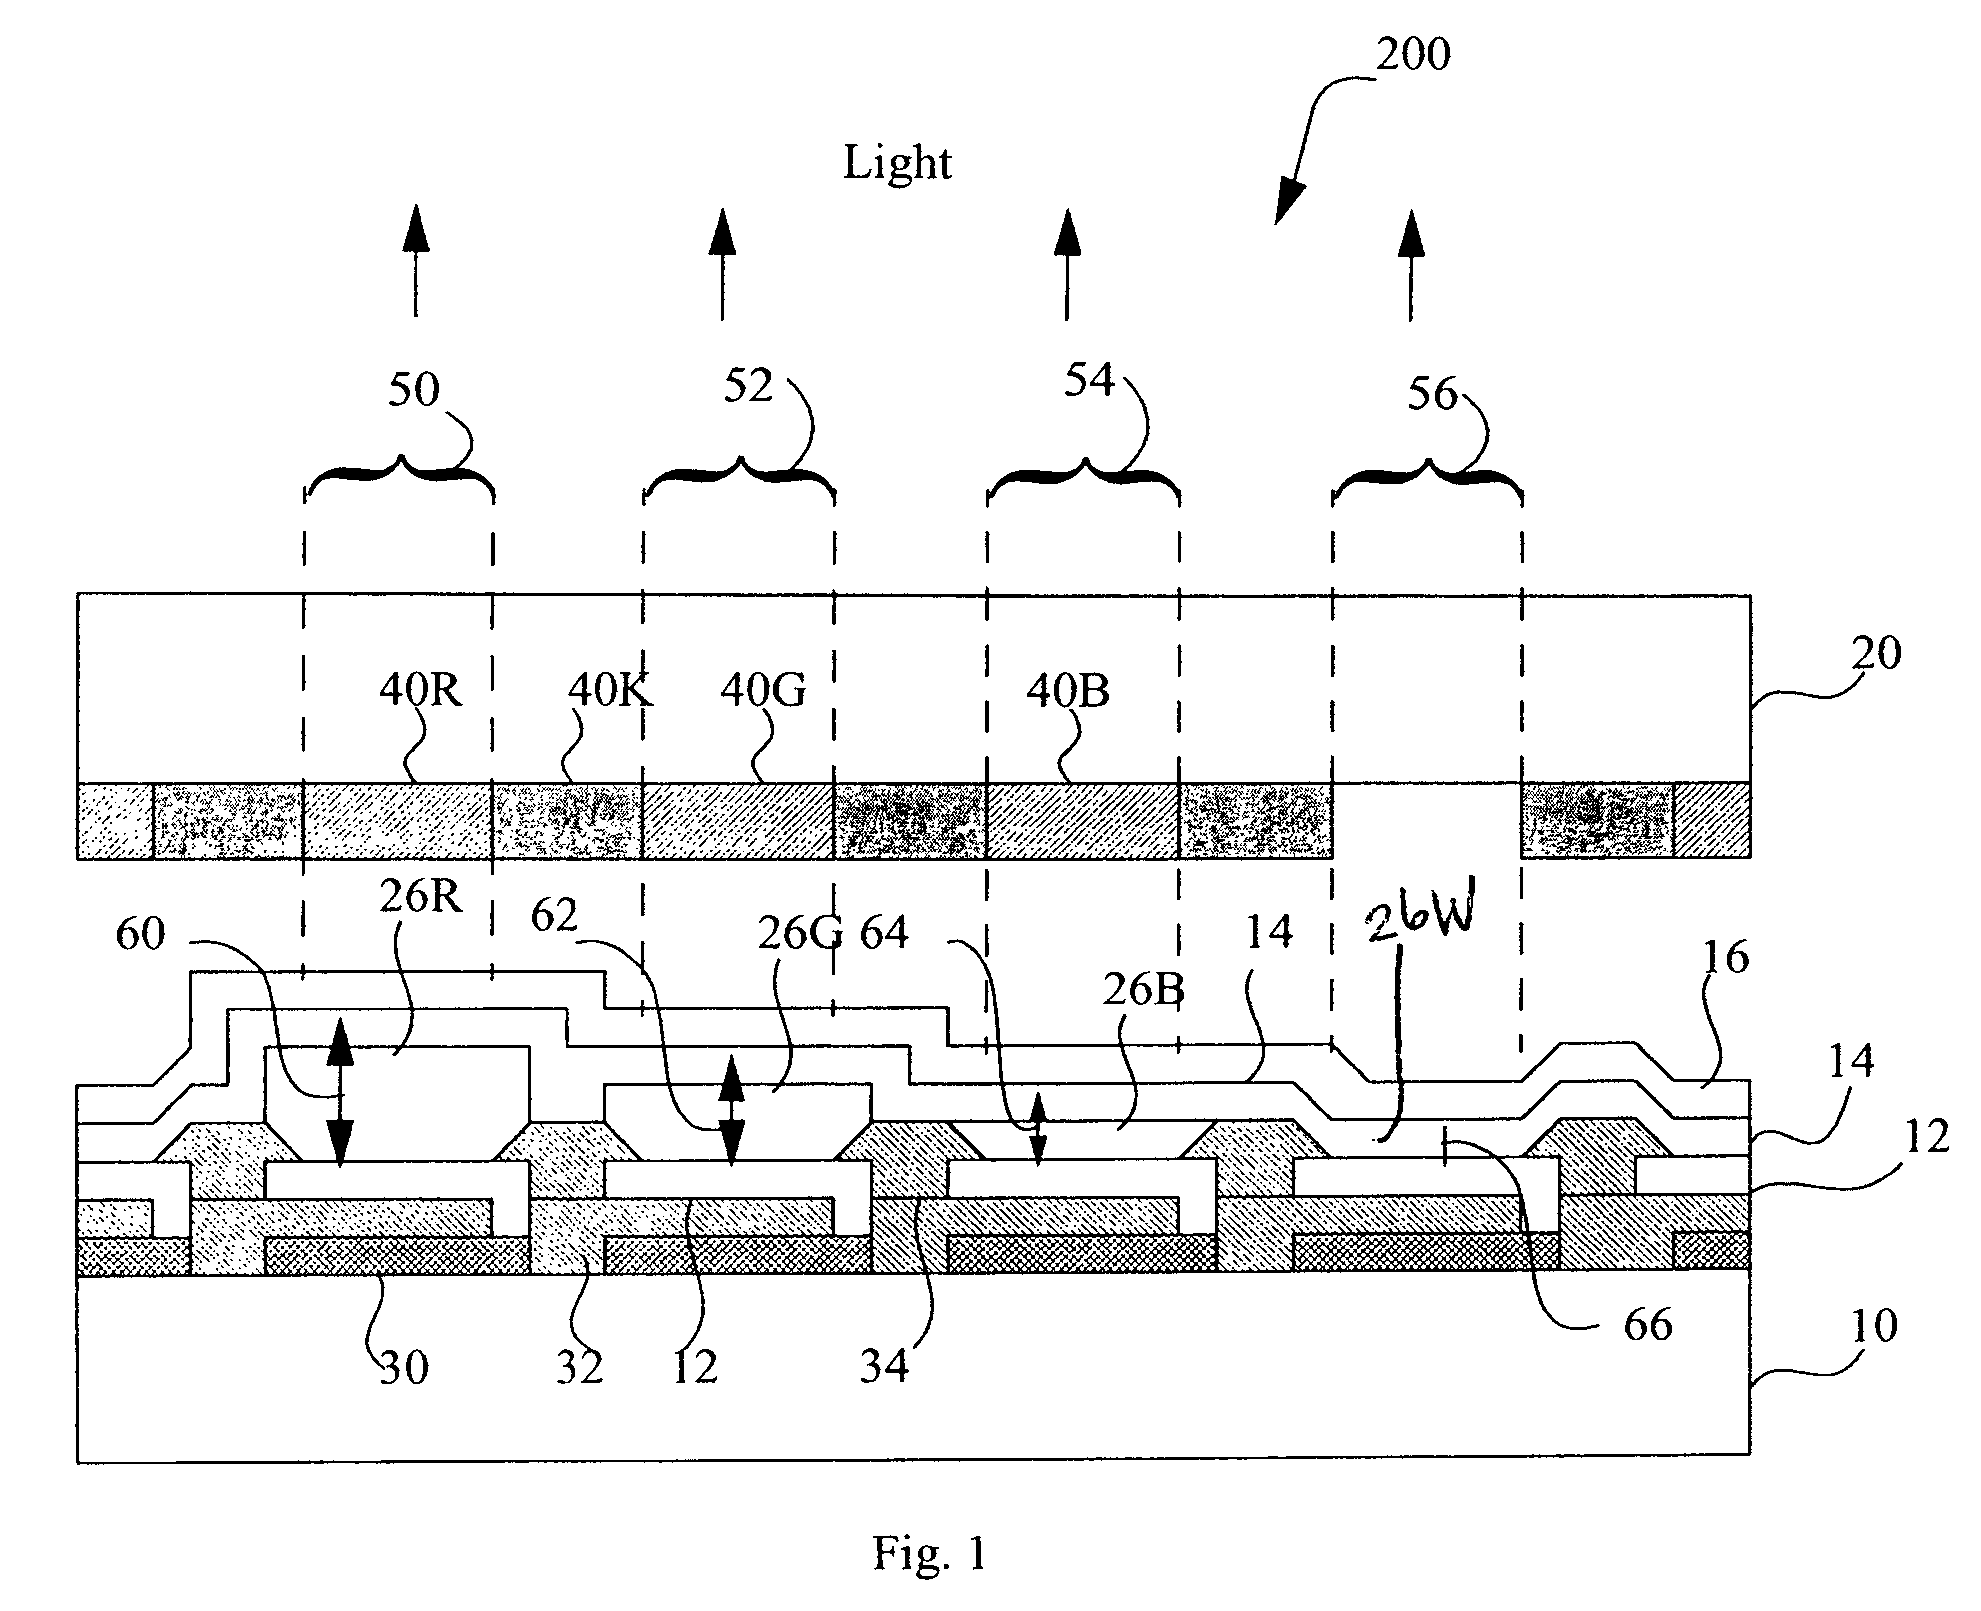 Light emitting diode device incorporating a white light emitting layer in combination with a plurality of optical microcavities